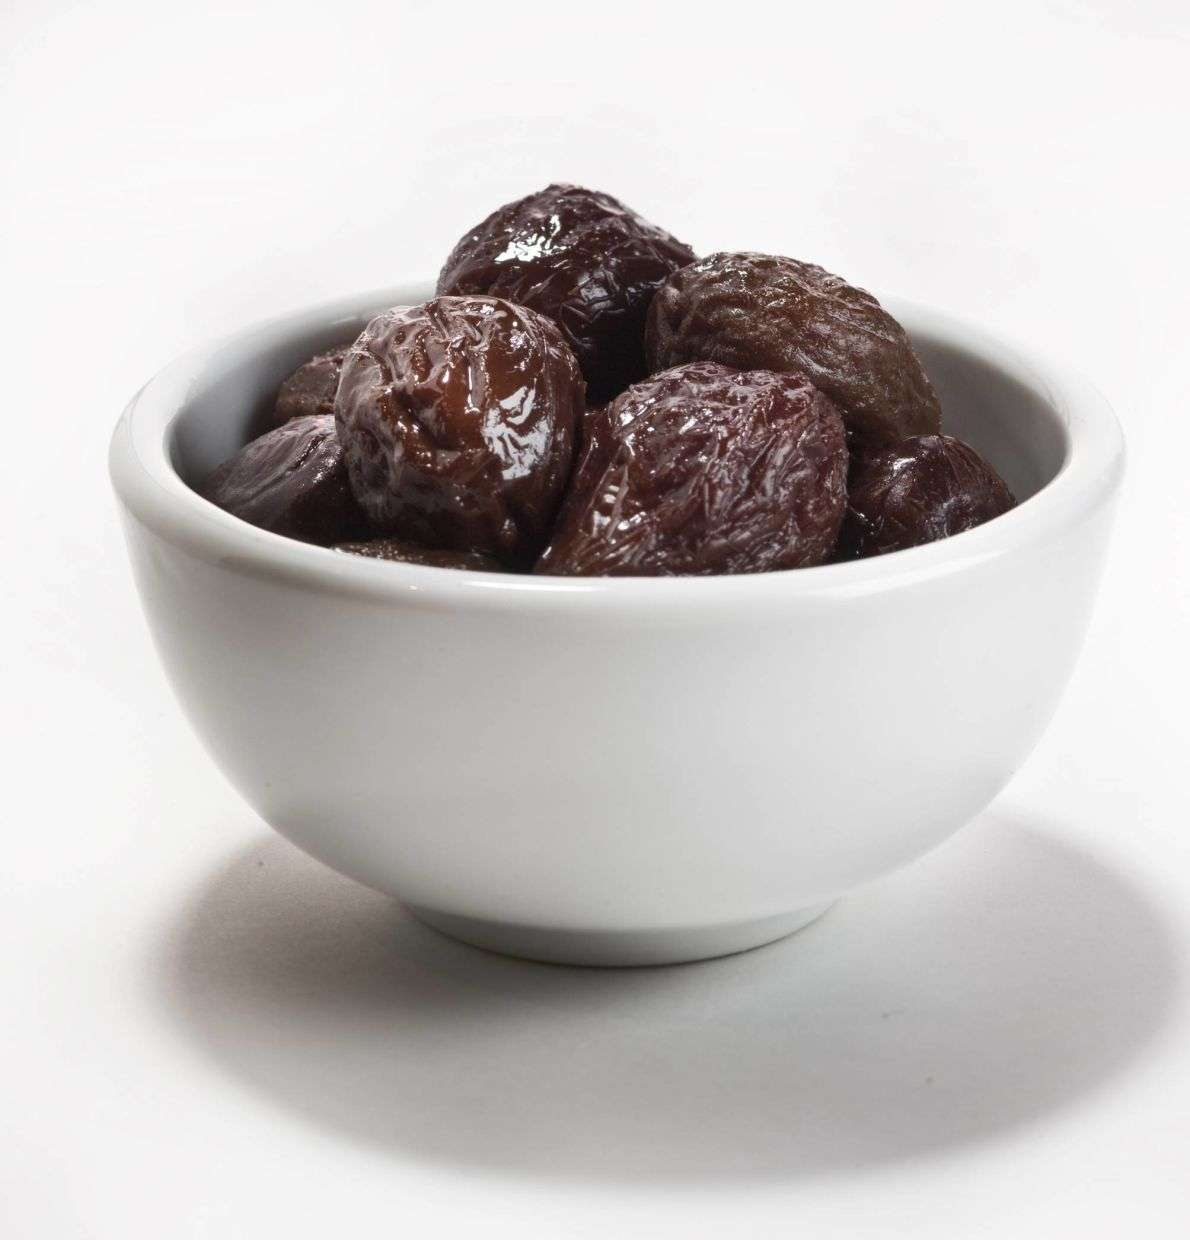 Food to help you poop: Prevent and relieve constipation by eating these ...